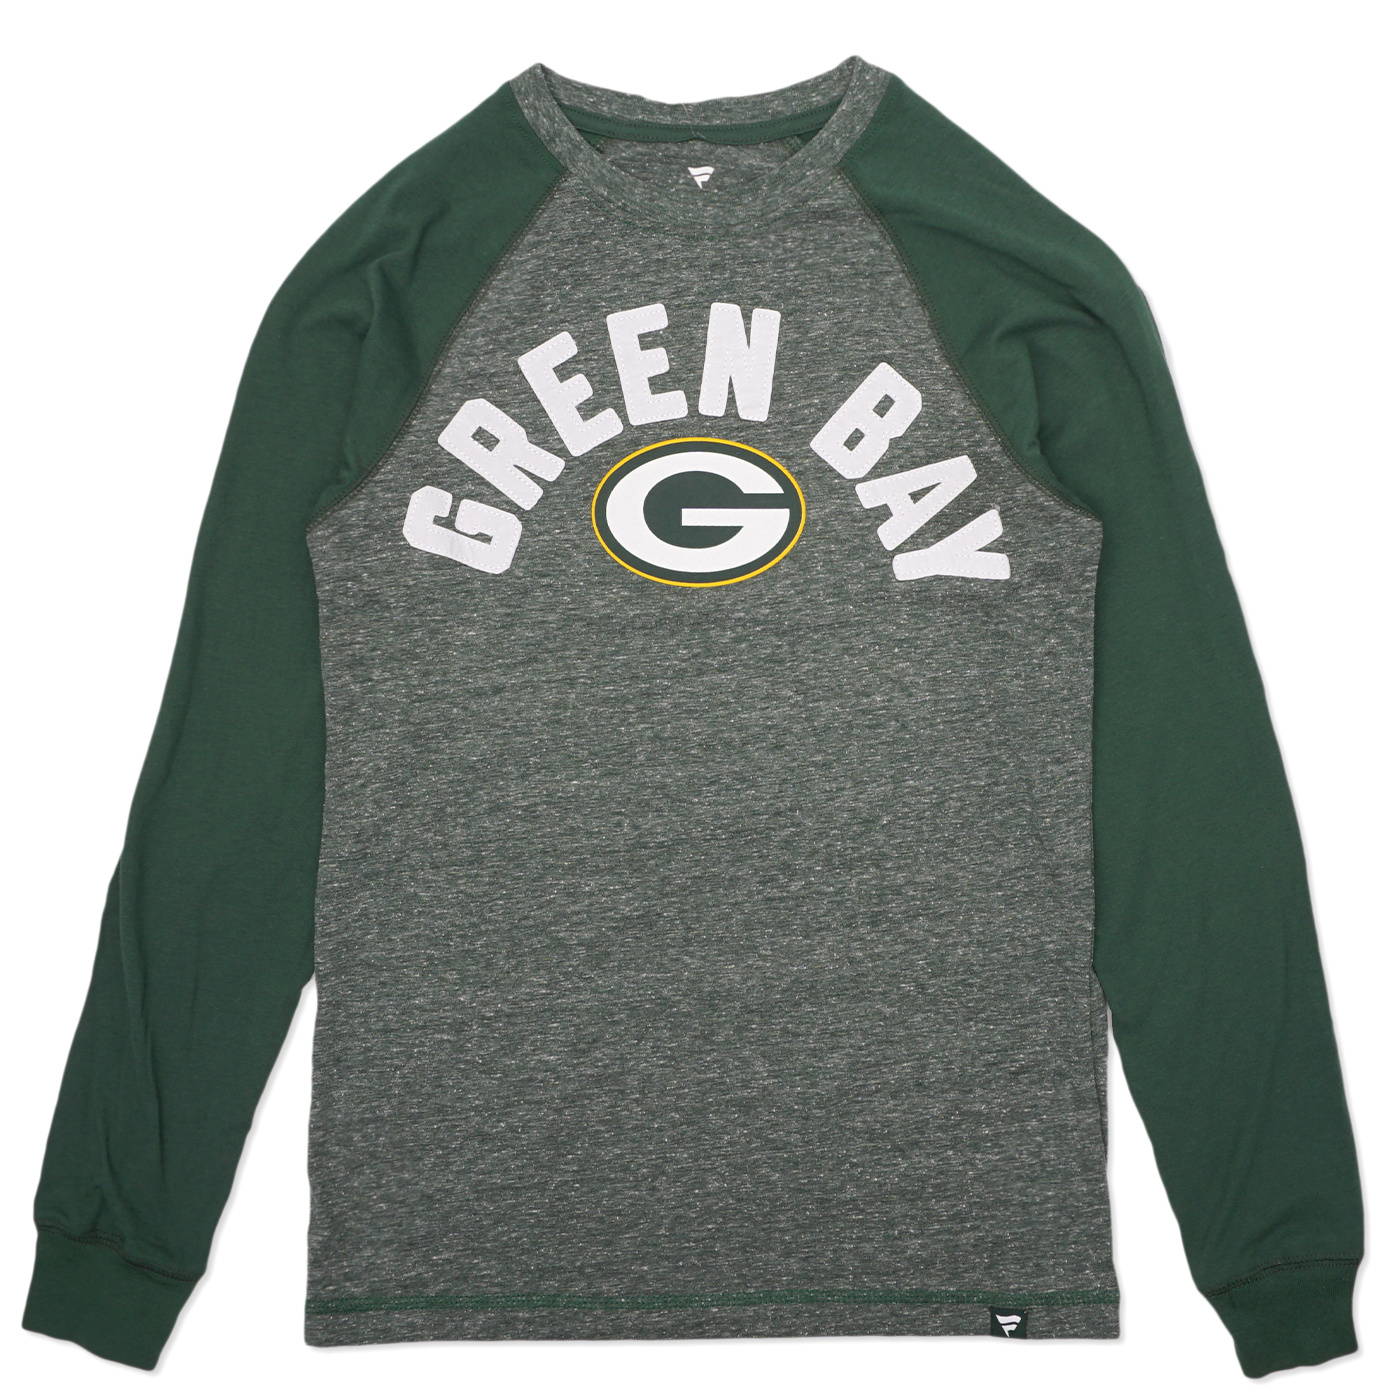 green bay packers apparel near me